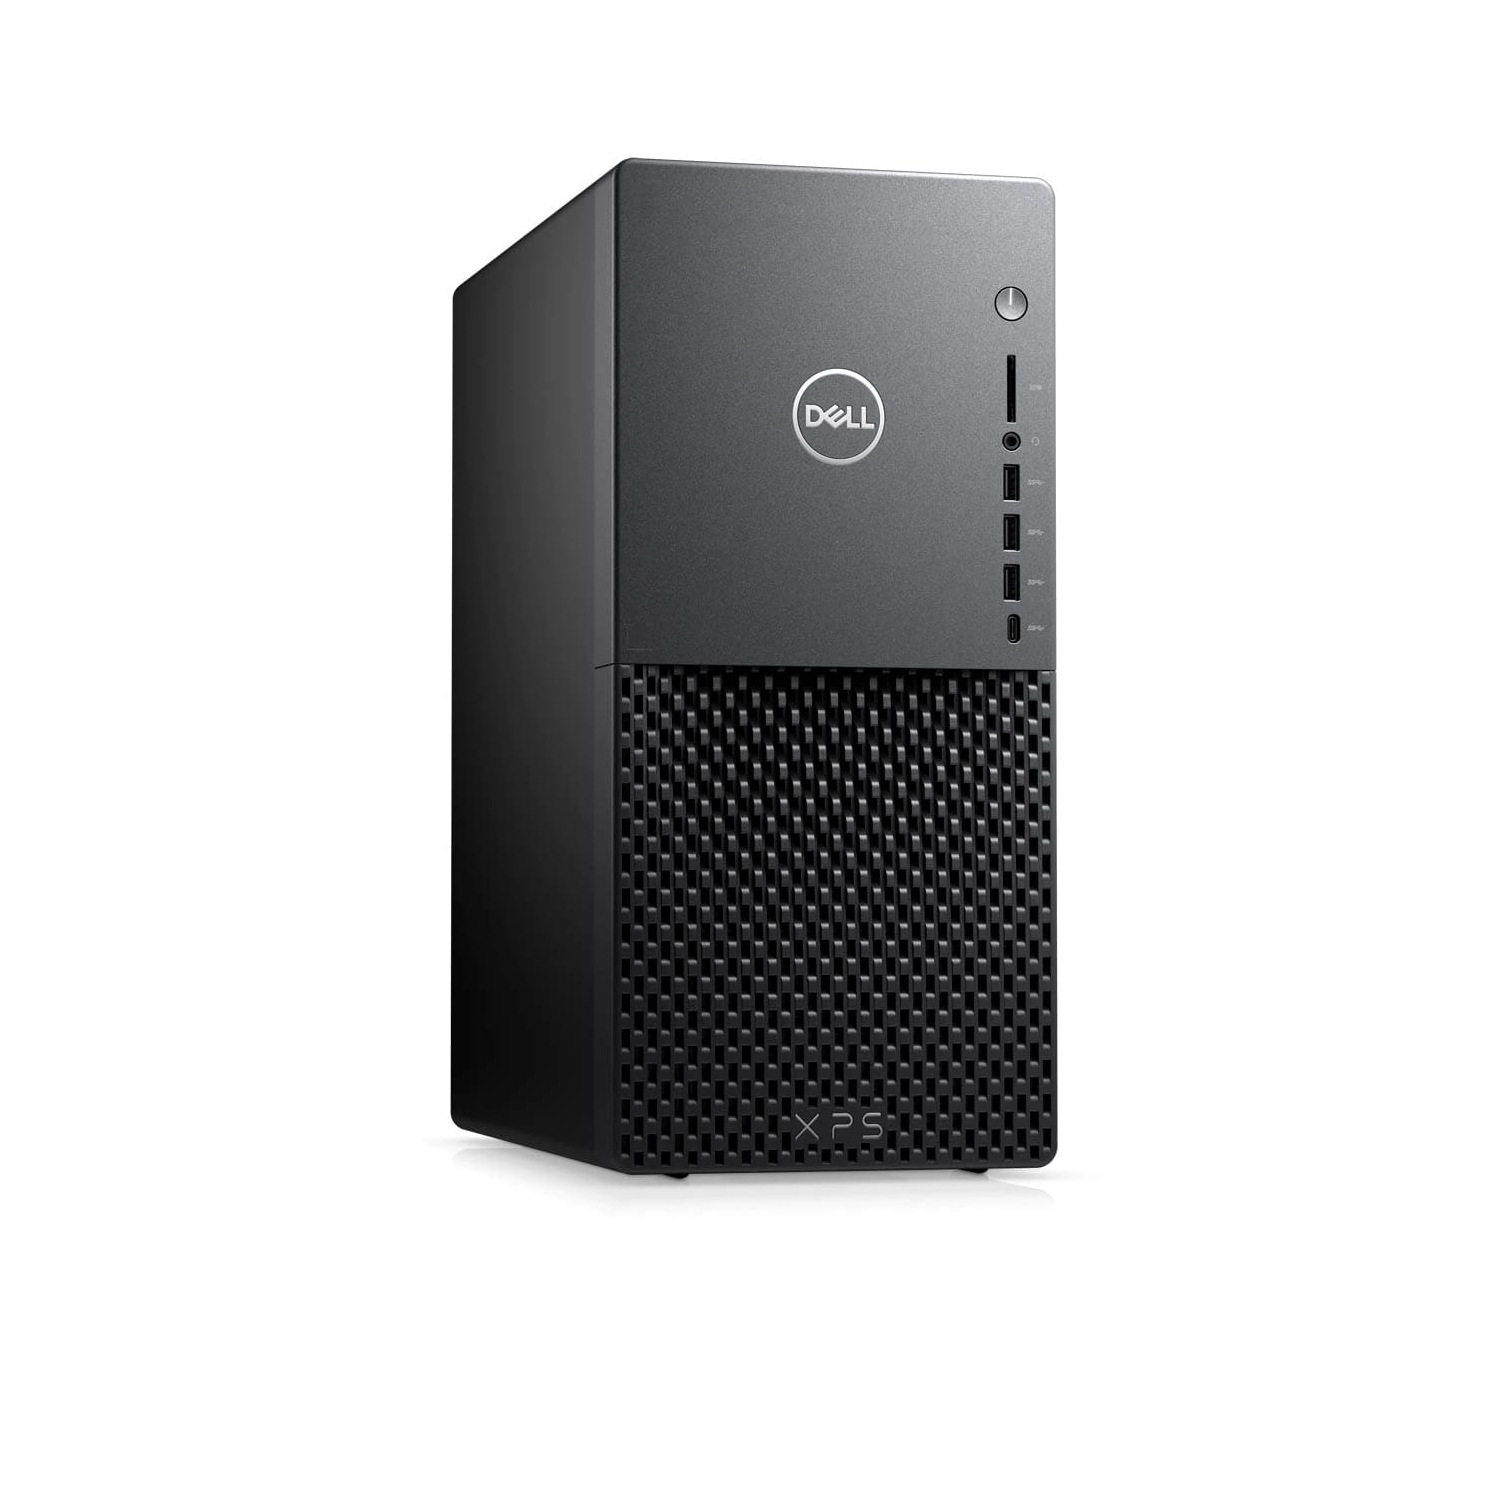 Refurbished (Excellent) - Dell XPS 8940 Desktop (2020) | Core i7 - 256GB SSD - 16GB RAM - RX 5700 | 8 Cores @ 4.9 GHz - 11th Gen CPU Certified Refurbished